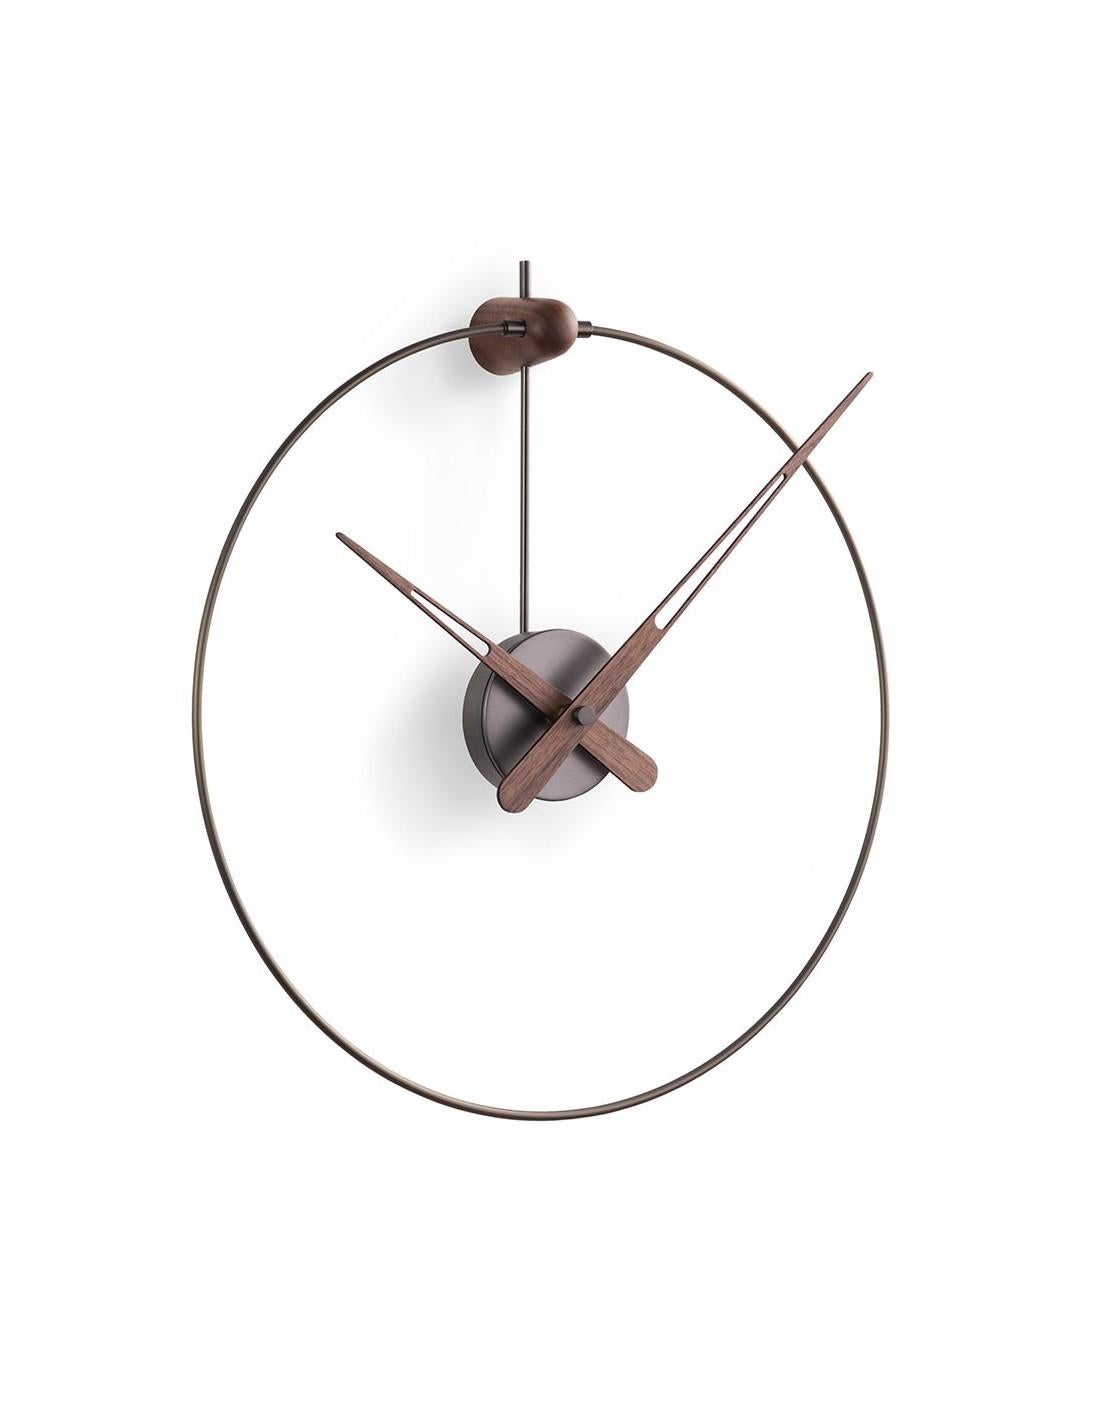 Micro Anda wall clock is one of the best models you can get on the market. It has a graphite finish brass case and ring and walnut hands. Its diameter is 40 centimeters and its height is 50 cm. The UTS machinery is made of quartz and comes from